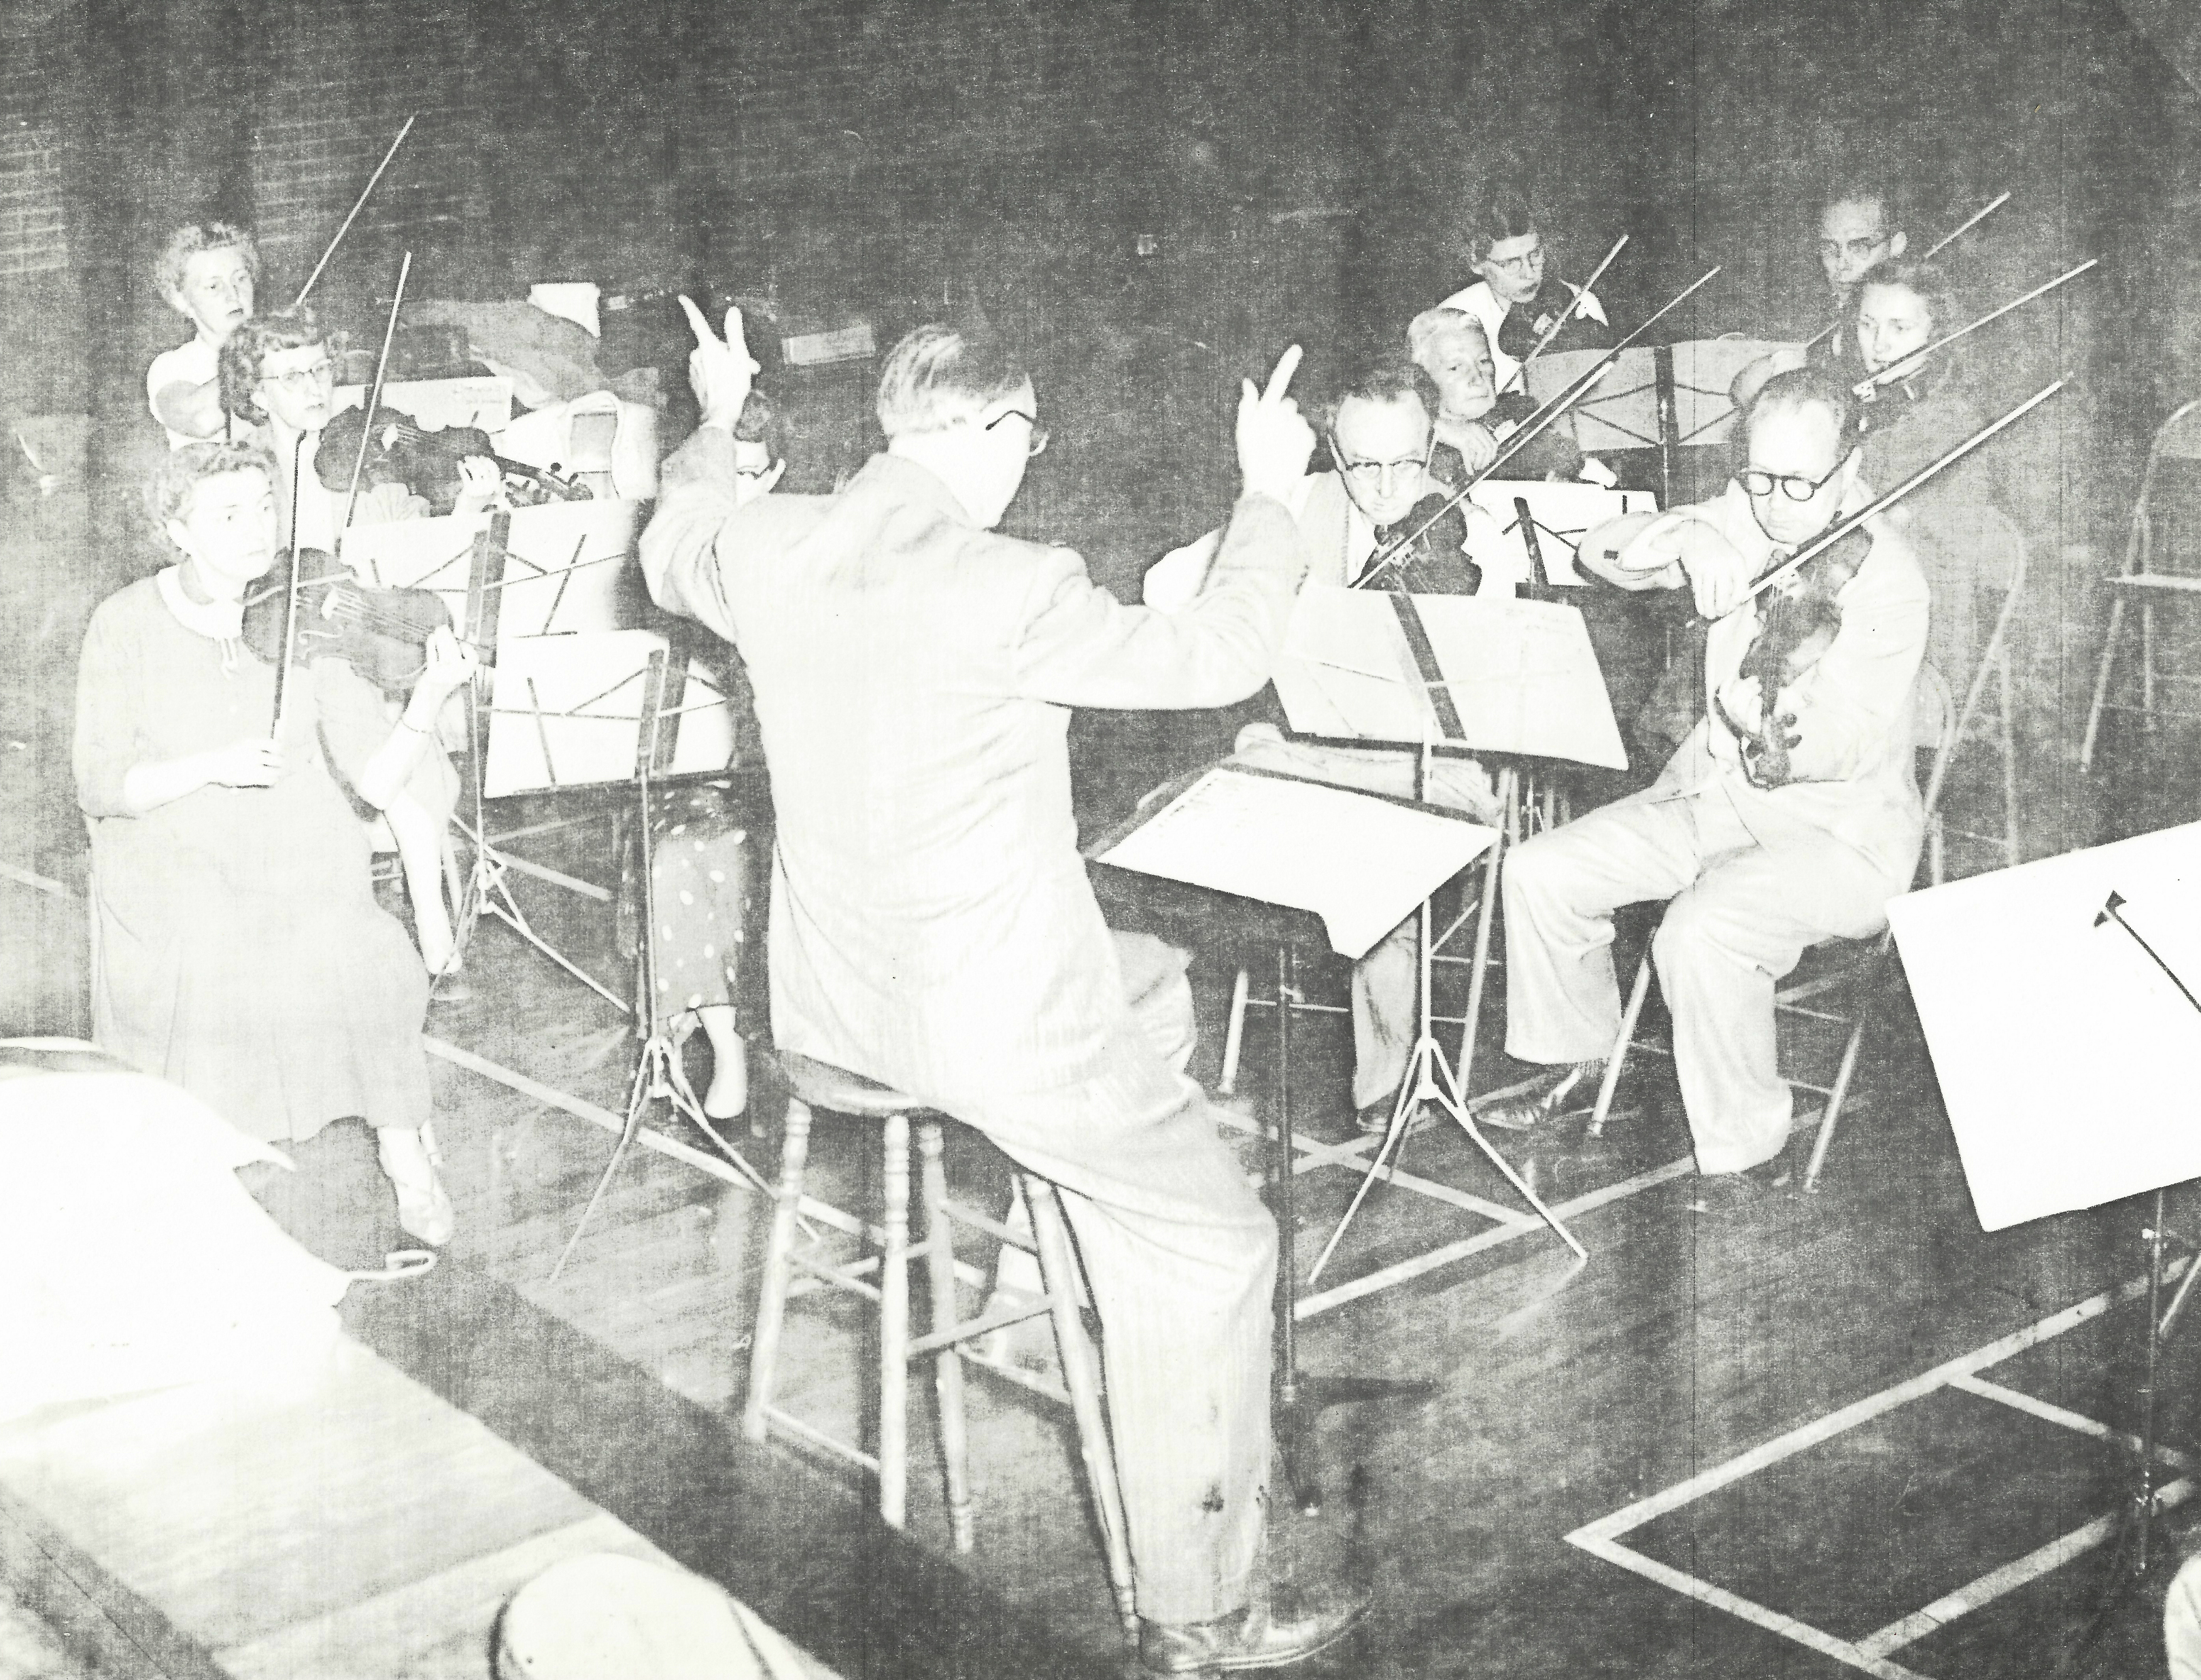 Jan Wolanek and violins in rehearsal